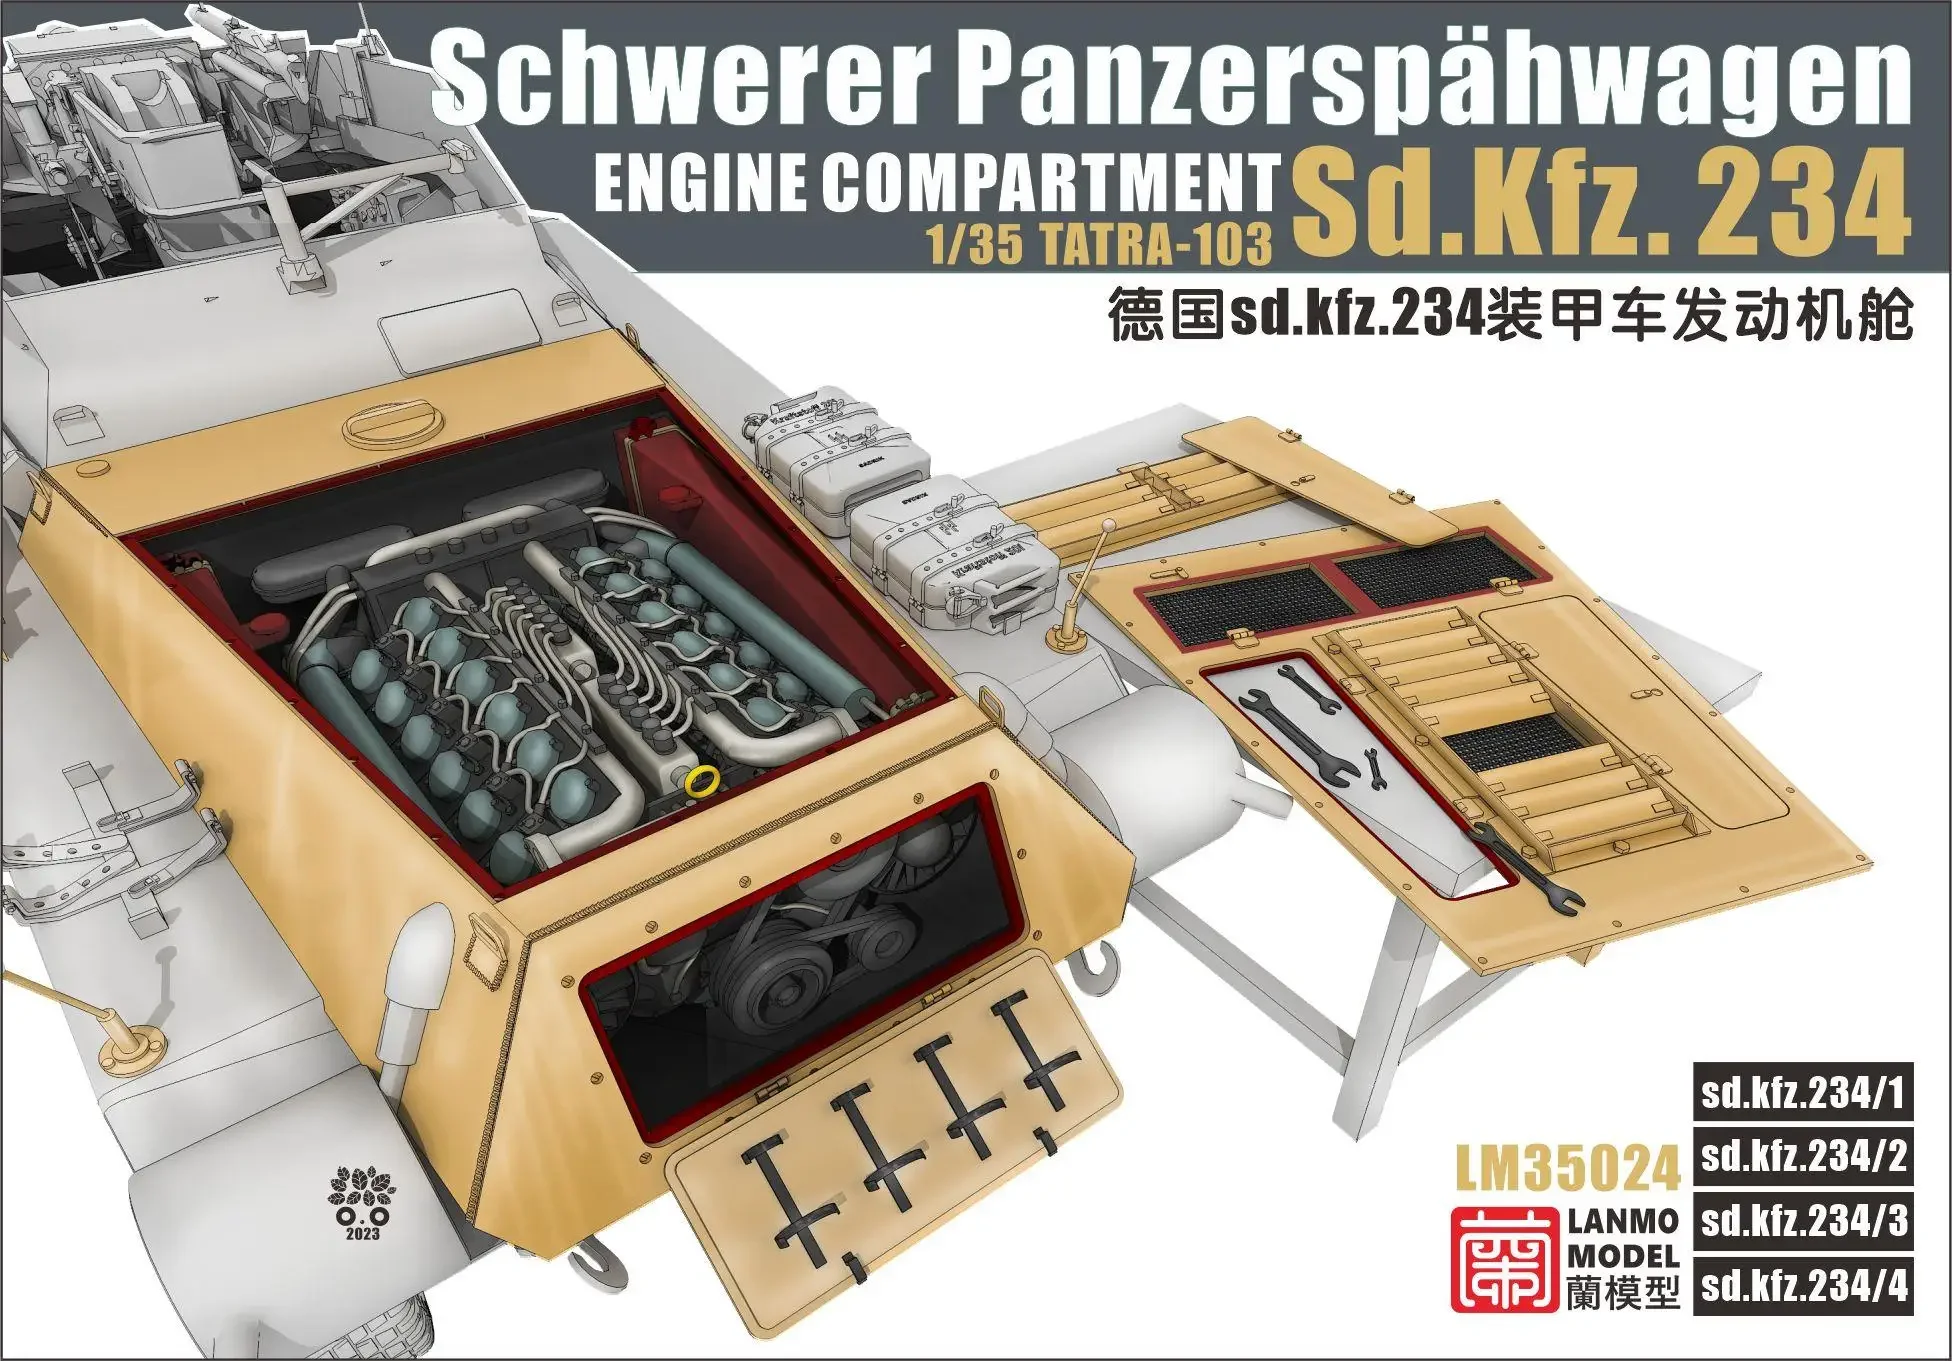 

Heavy Hobby LM-35024 1/35 Scale WWII Schwerer Panzerspahwagen Germany sd.kfz.234 ENGINE COMPARTMENT TATRA-103